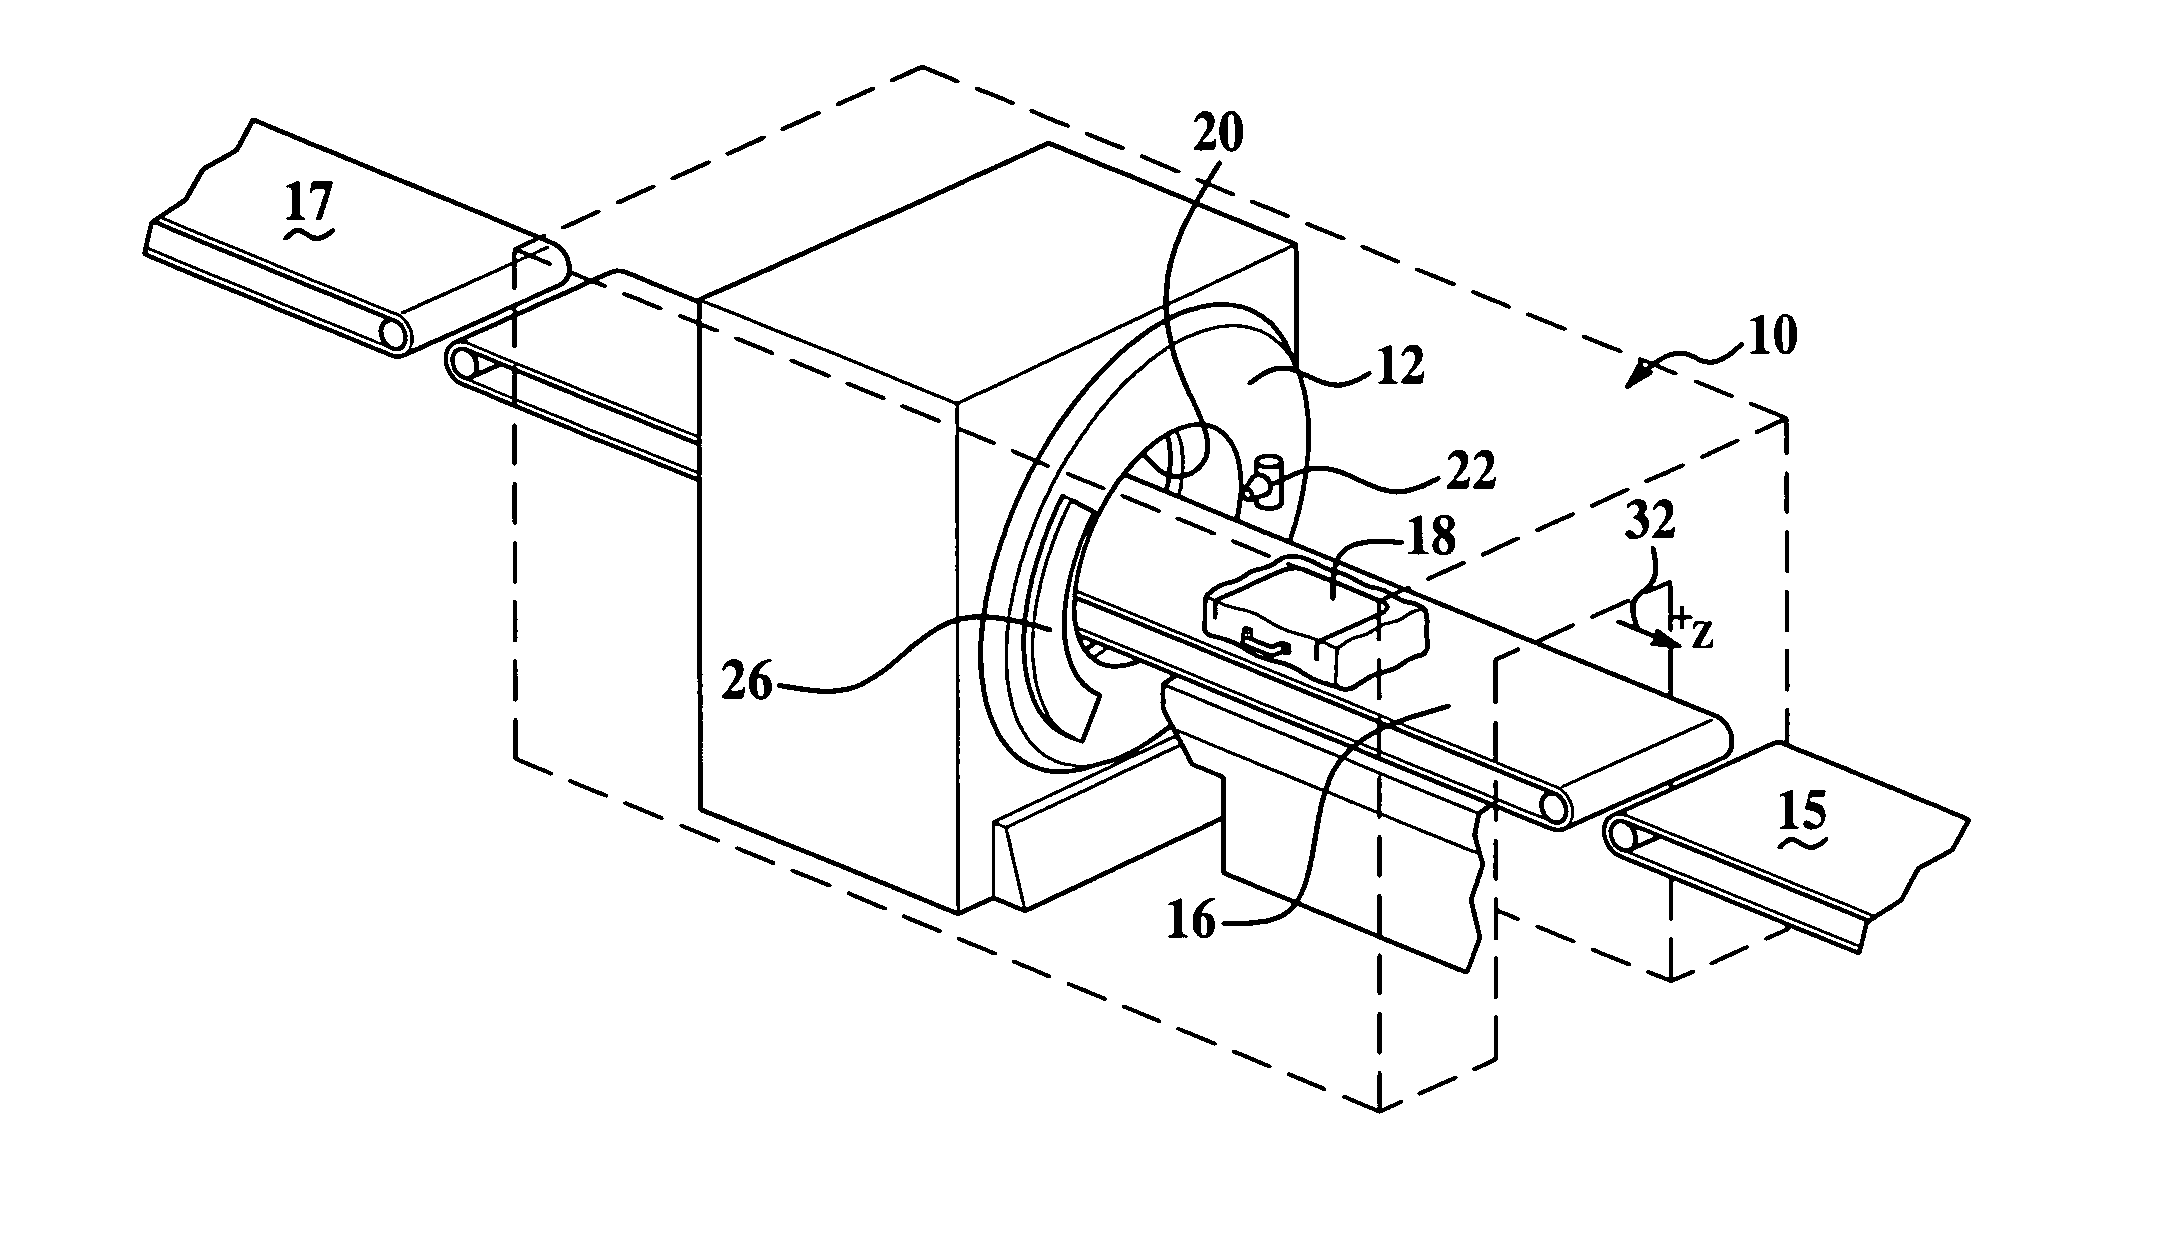 Apparatus and method for controlling start and stop operations of a computed tomography imaging system